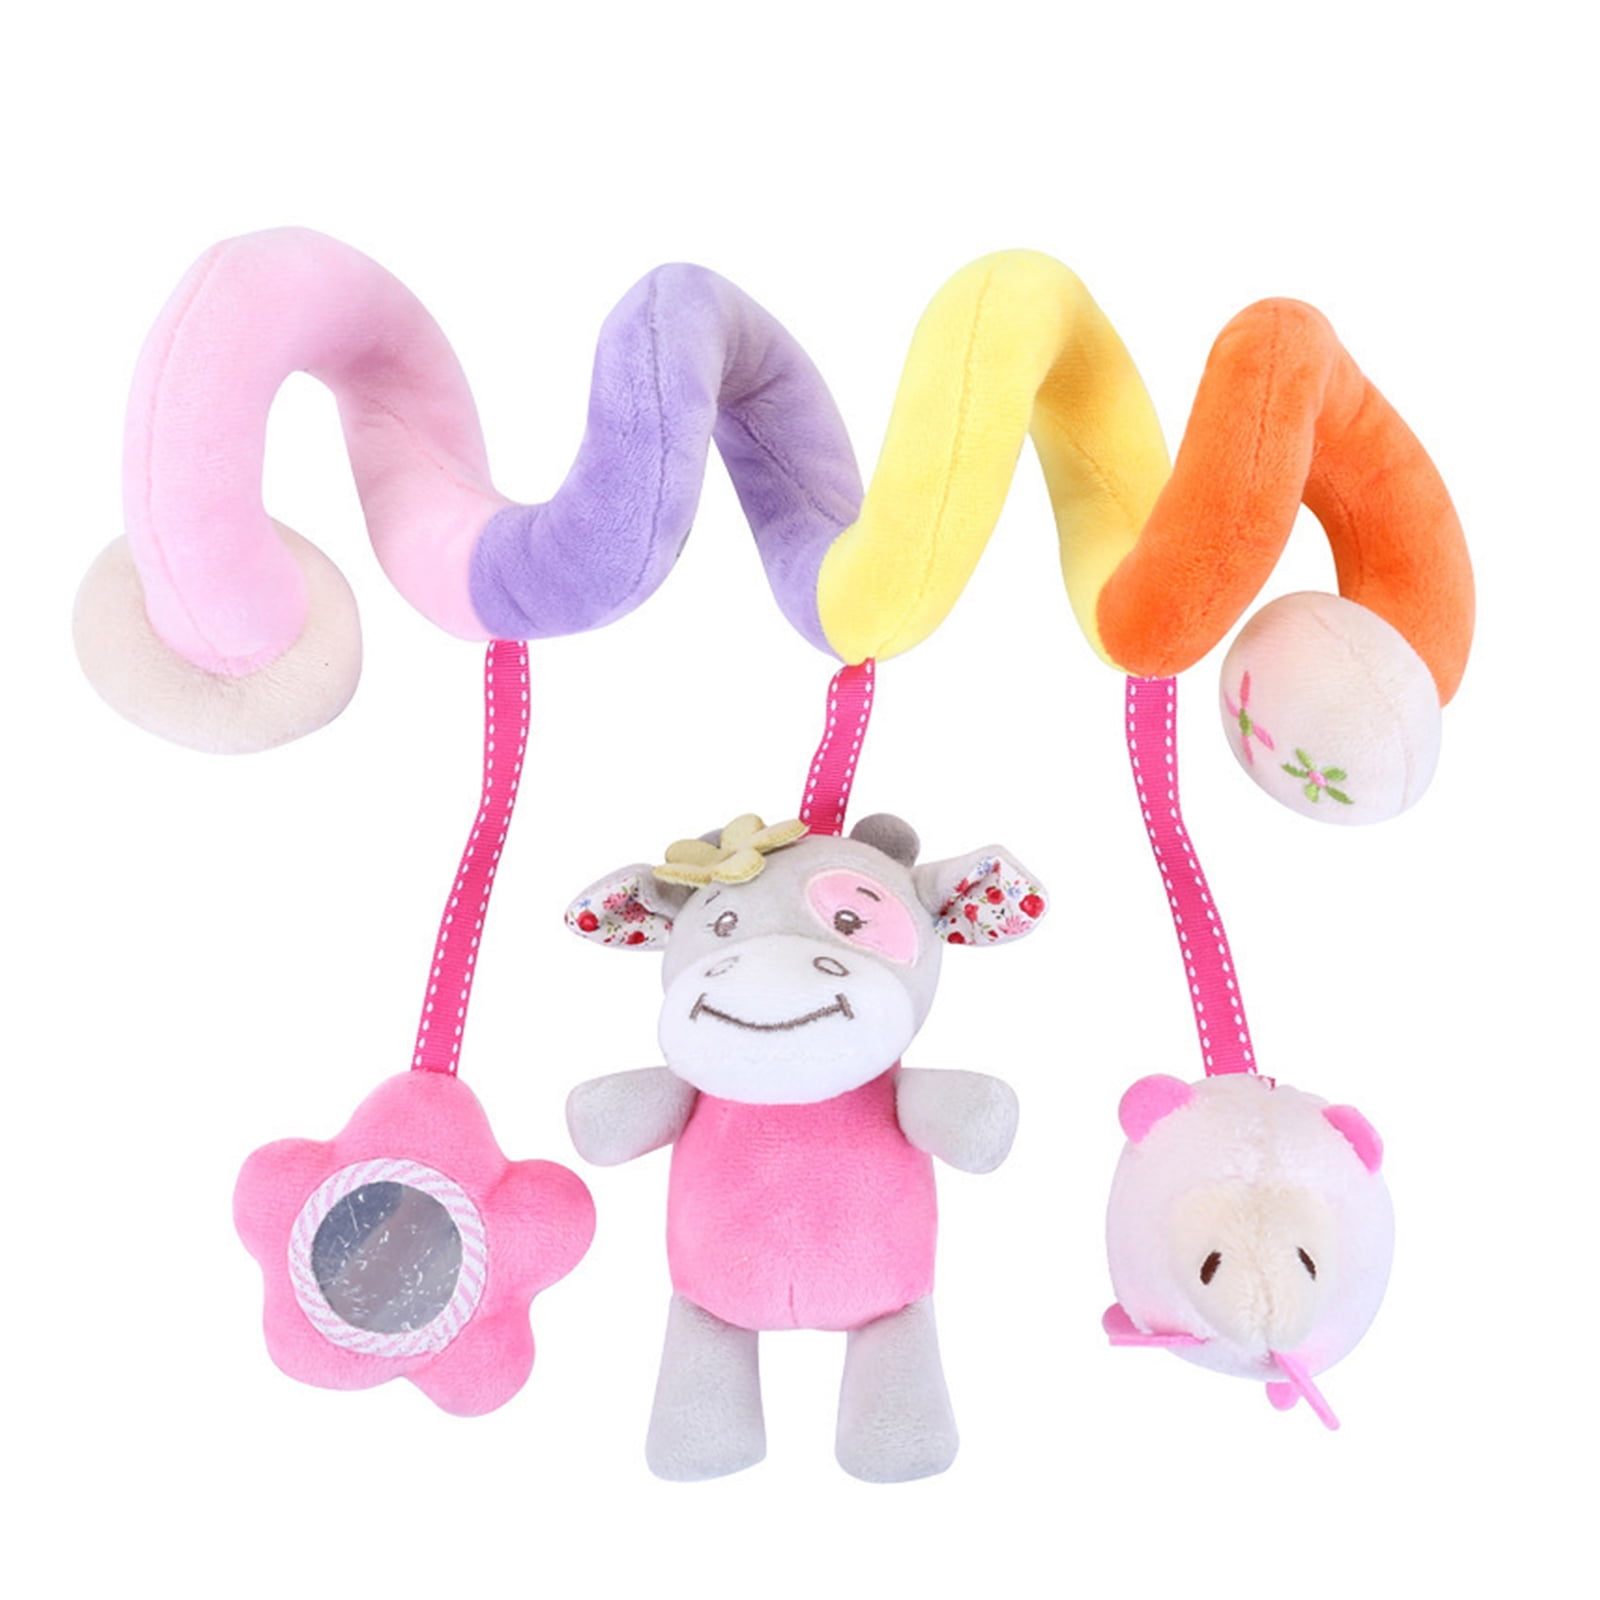 Baby Stroller Infant Bed Hanging Bell Rattle Crib Plush Spiral Toy Perfect Gift 